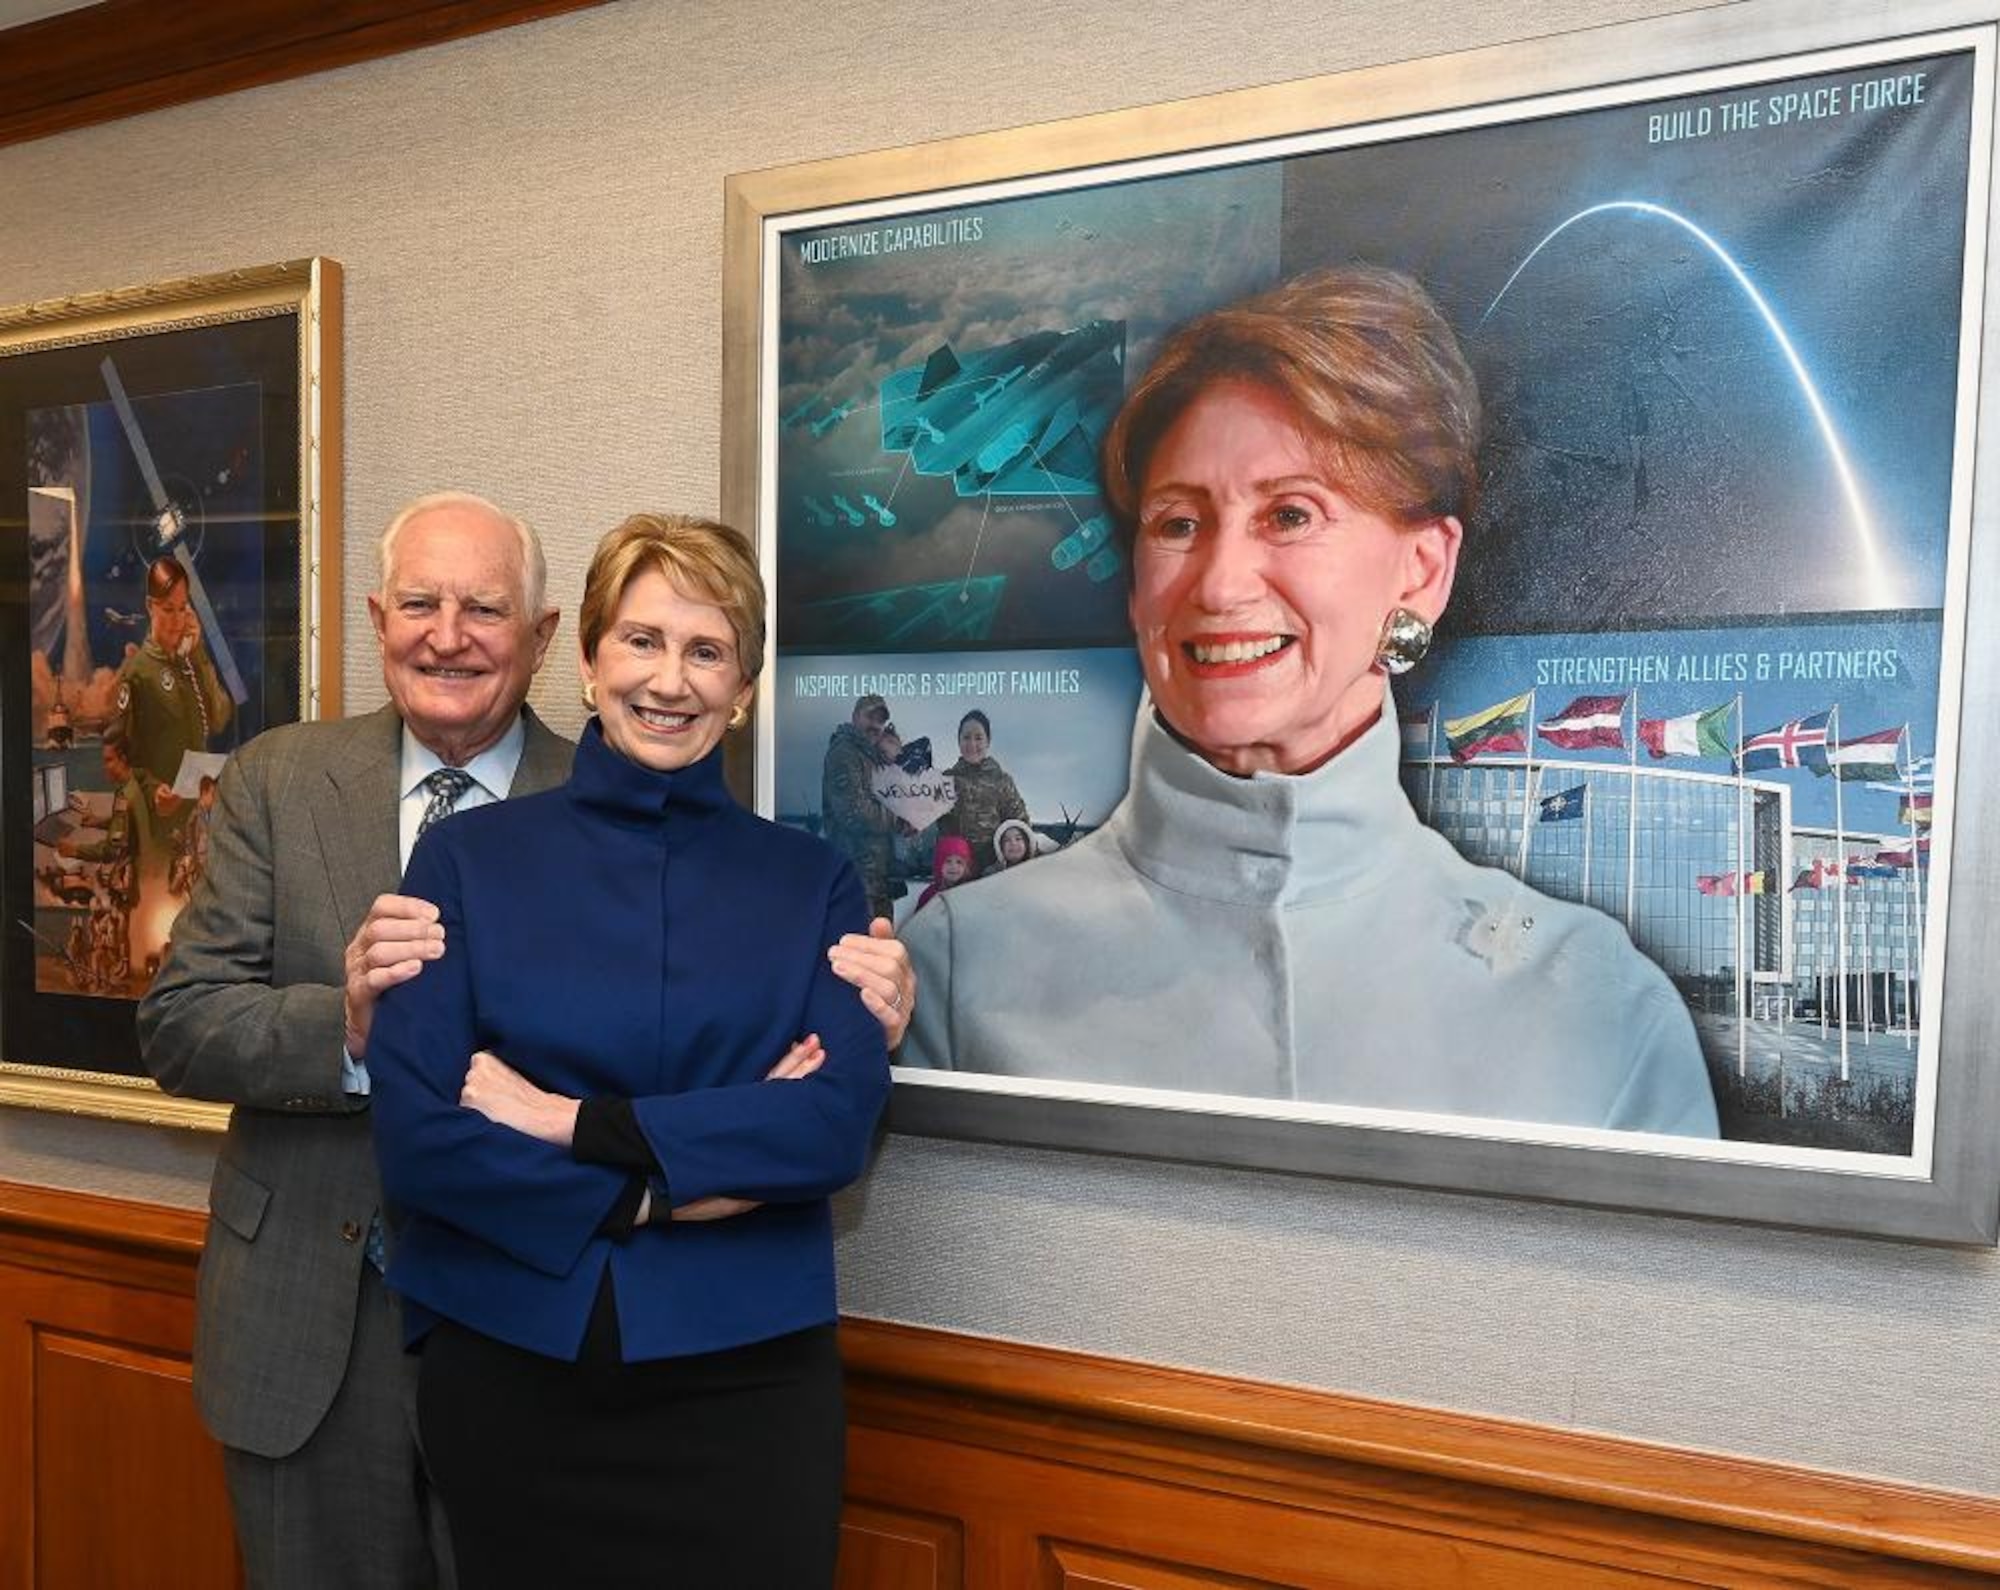 Former Secretary of the Air Force Barbara Barrett and her husband Craig pose next to her official portrait after the unveiling ceremony in the Pentagon, Arlington, Va., May 13, 2022. (U.S. Air Force photo by Andy Morataya)